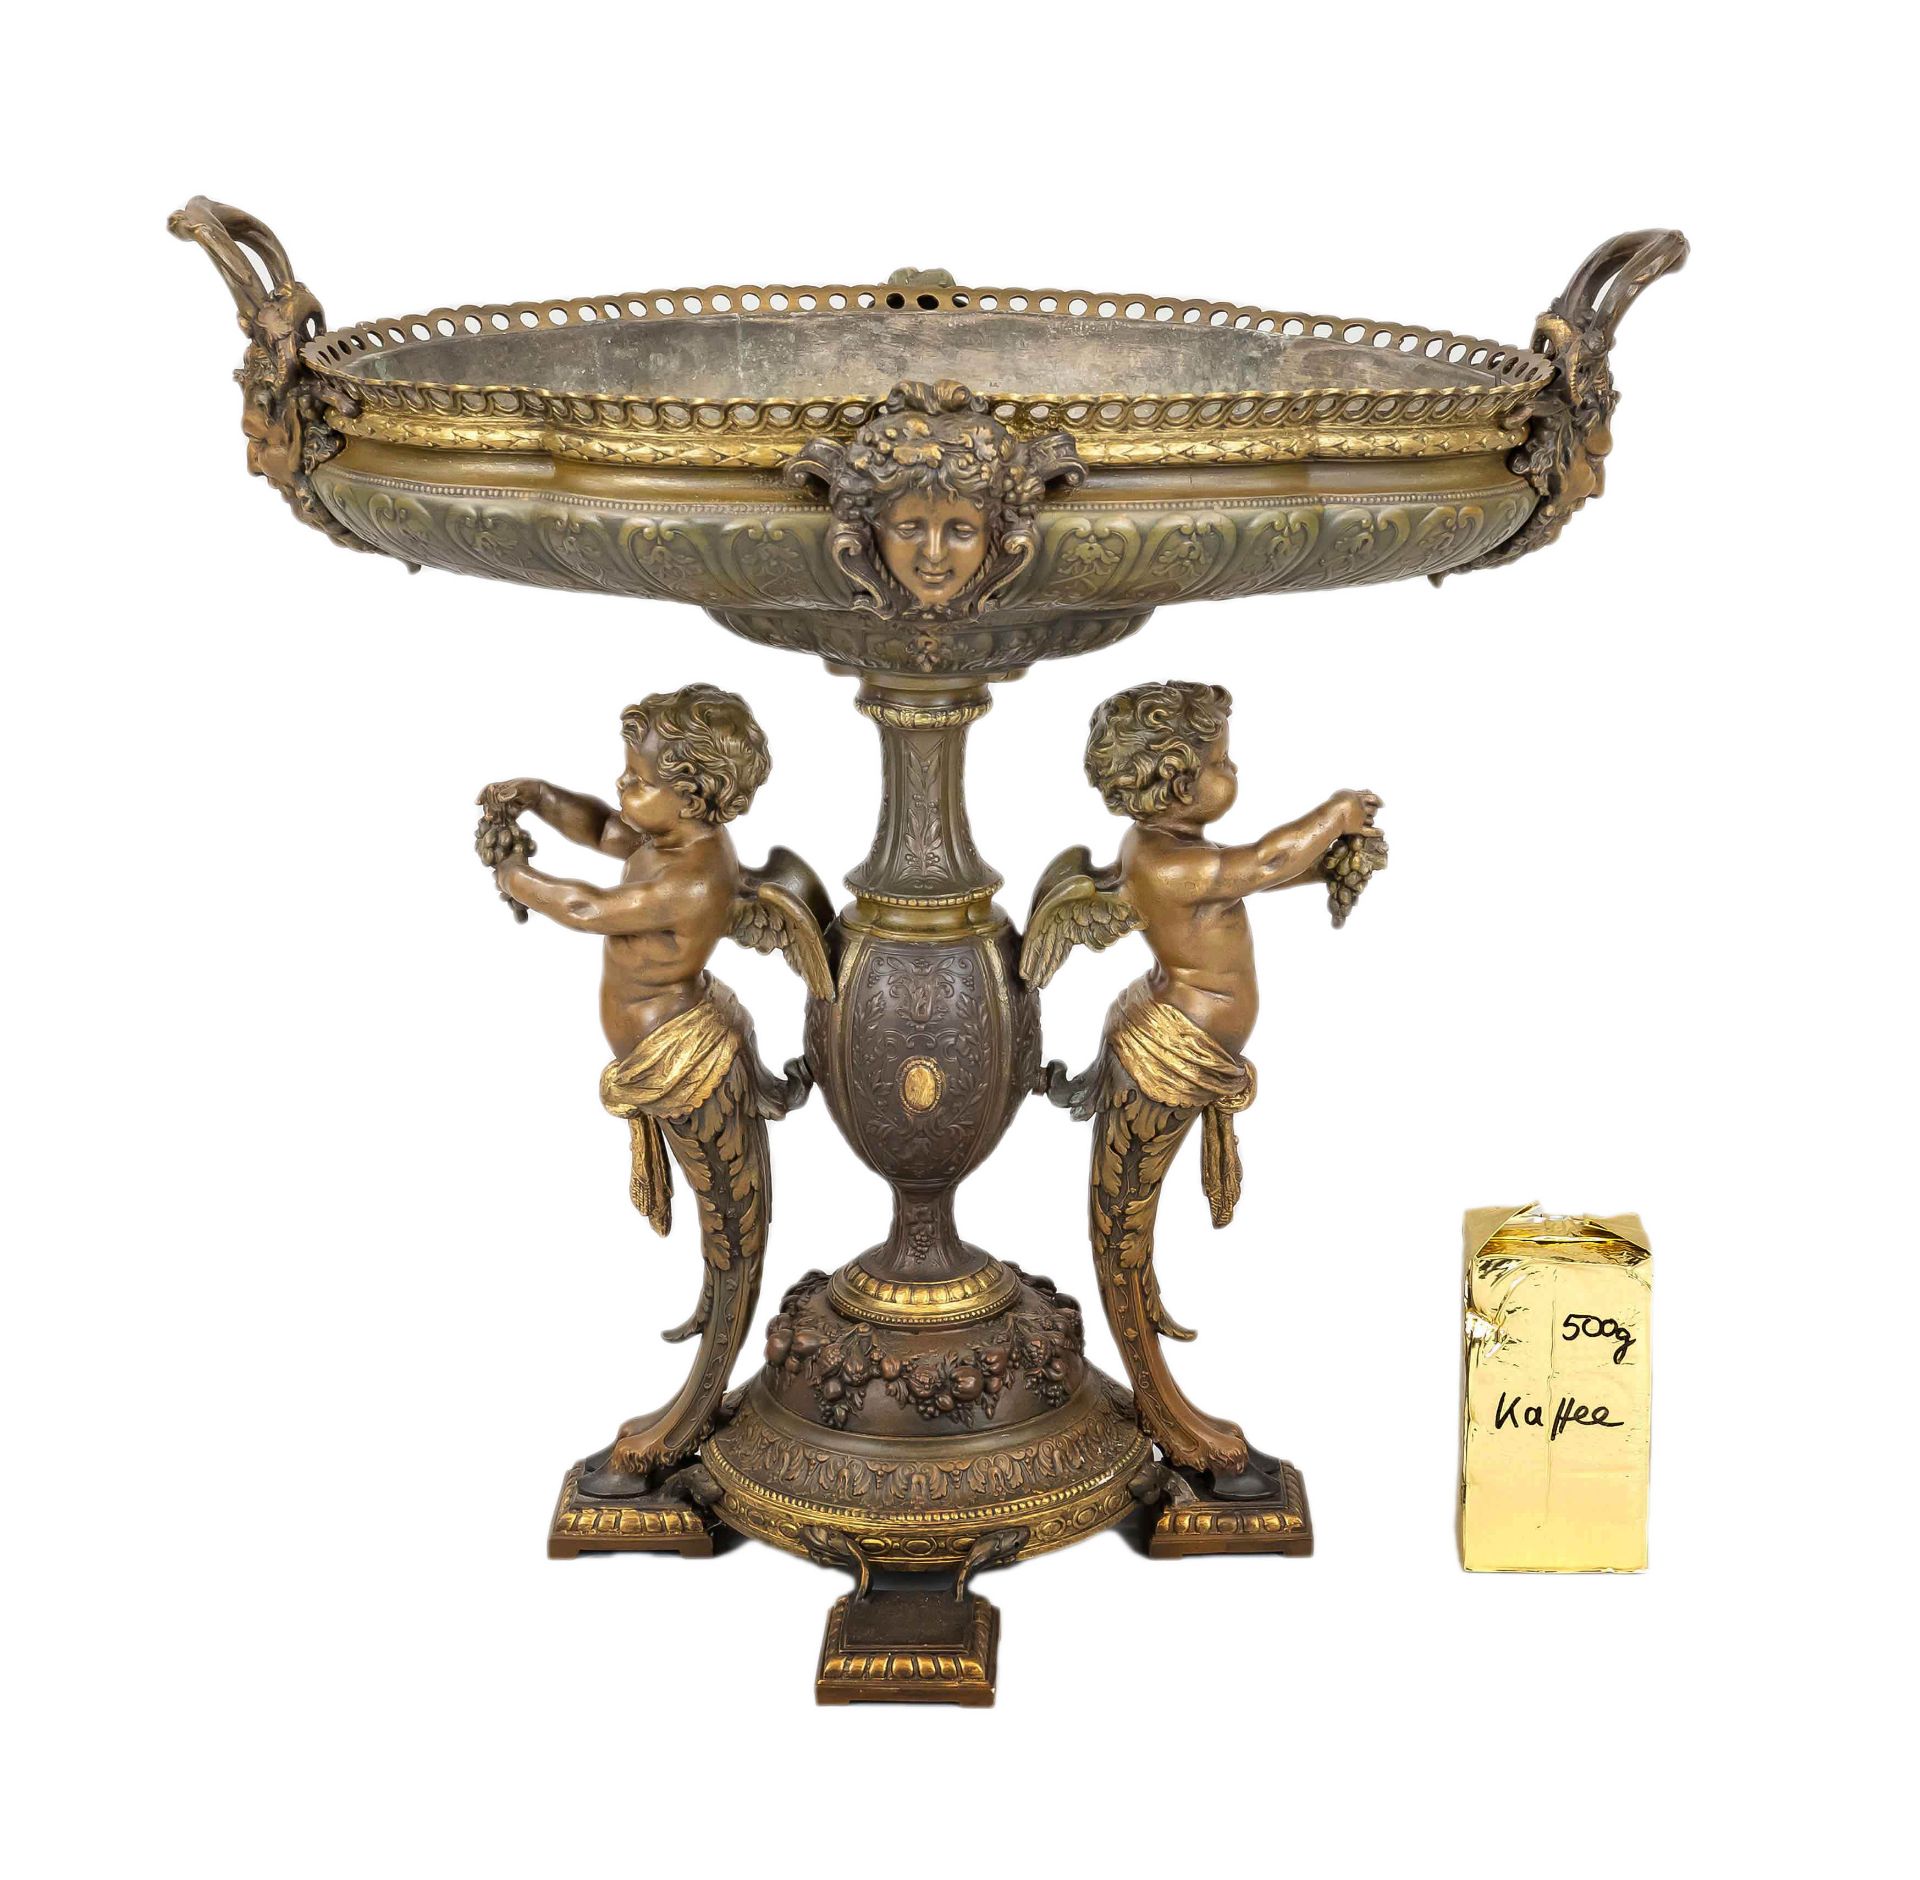 Free-standing state jardiniere, 19th century, four-pass base with satyr putti bacchants around a